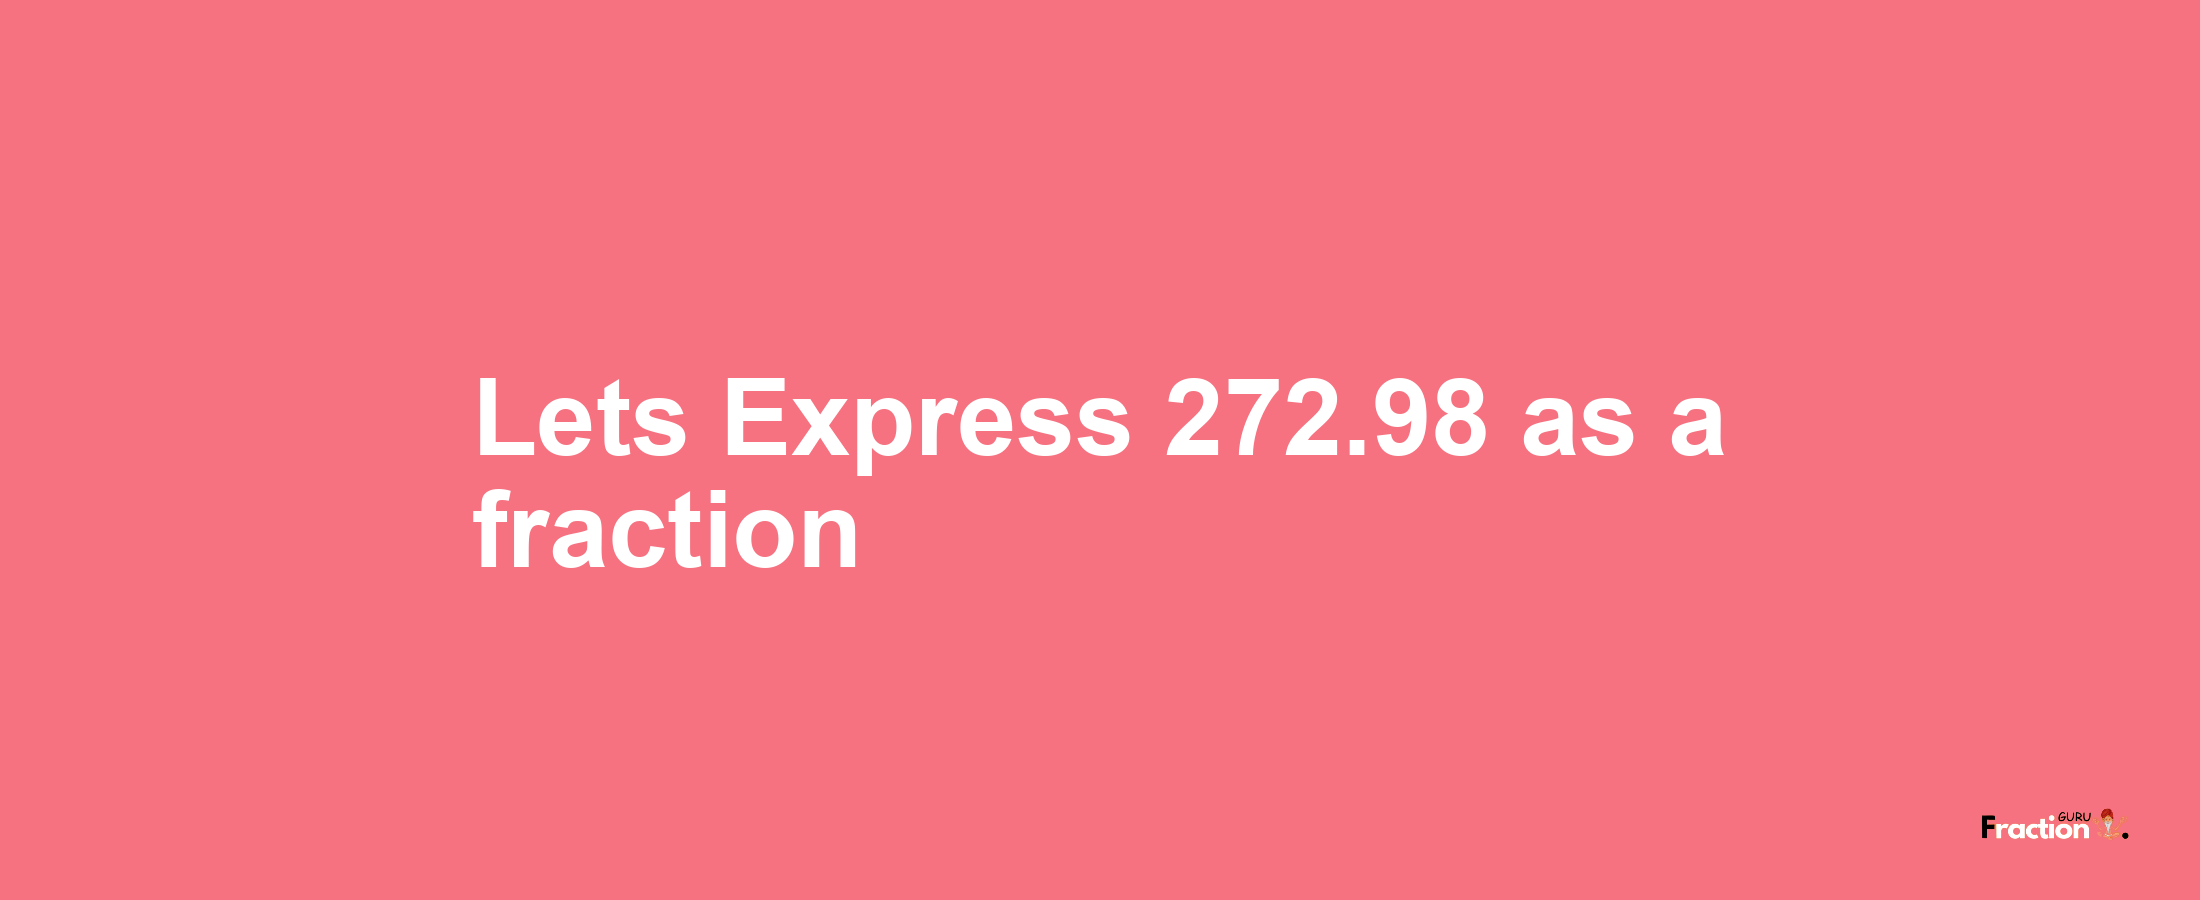 Lets Express 272.98 as afraction